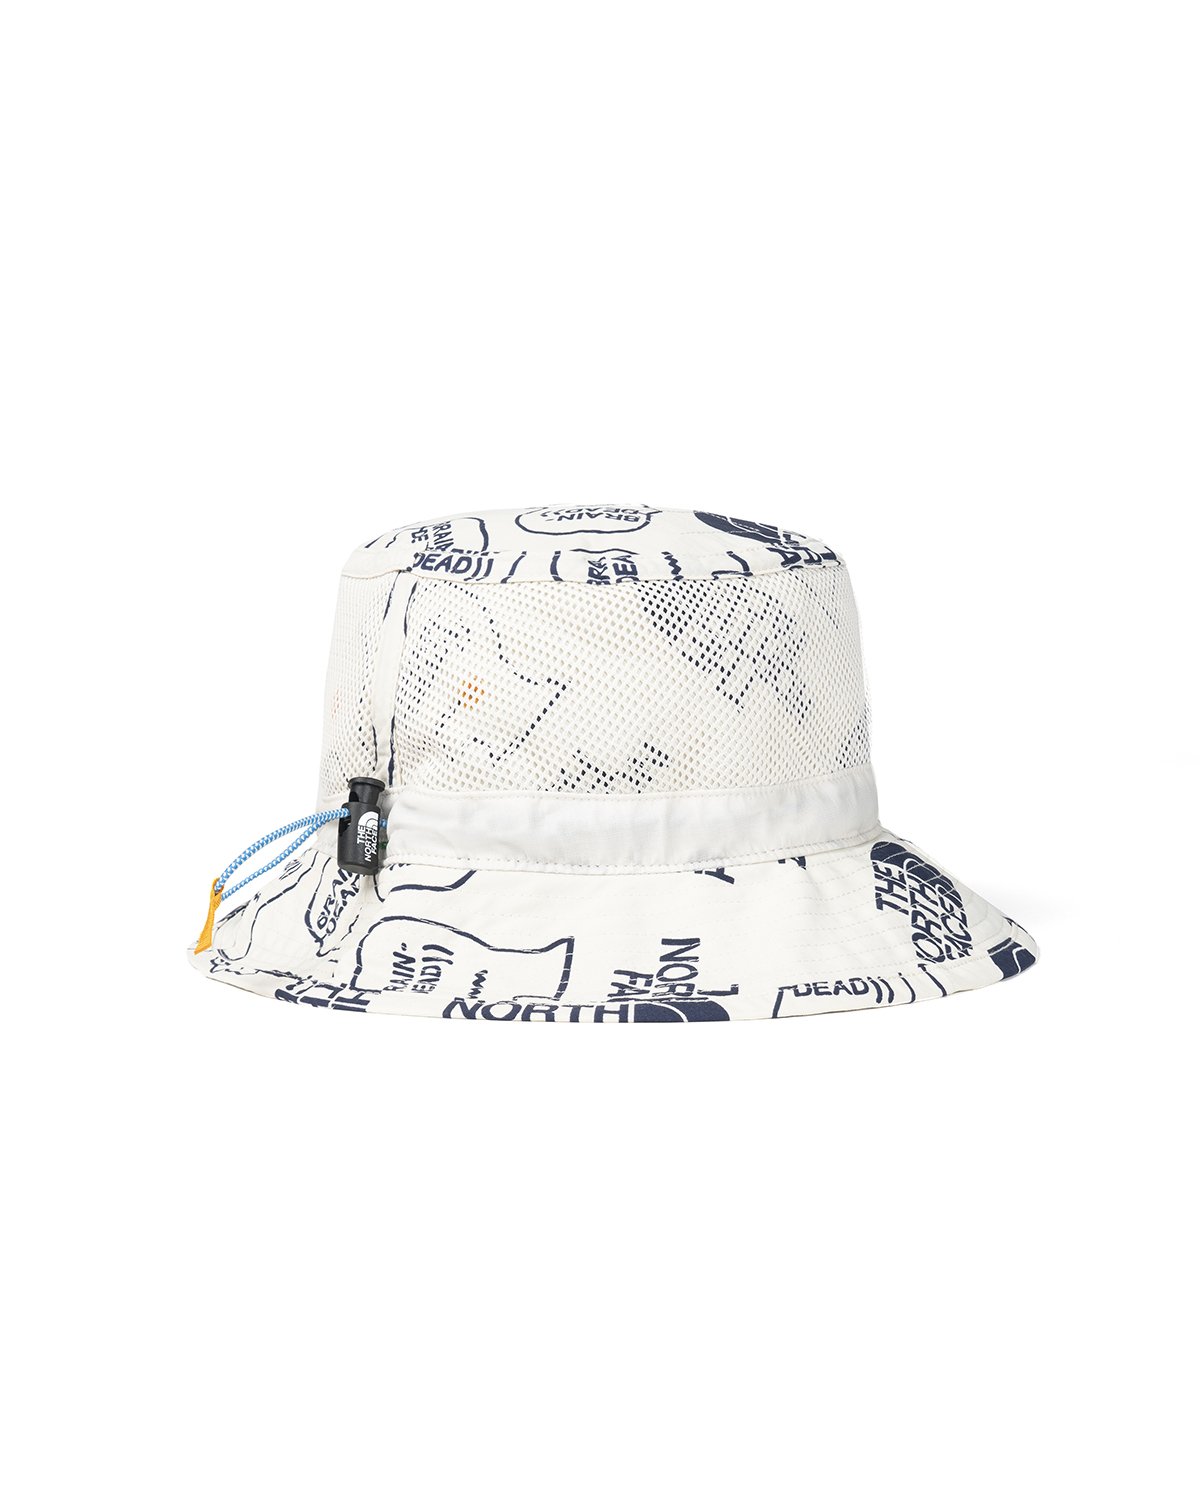 The North Face x Brain Dead Bucket Hat Vintage White - FW20 - US